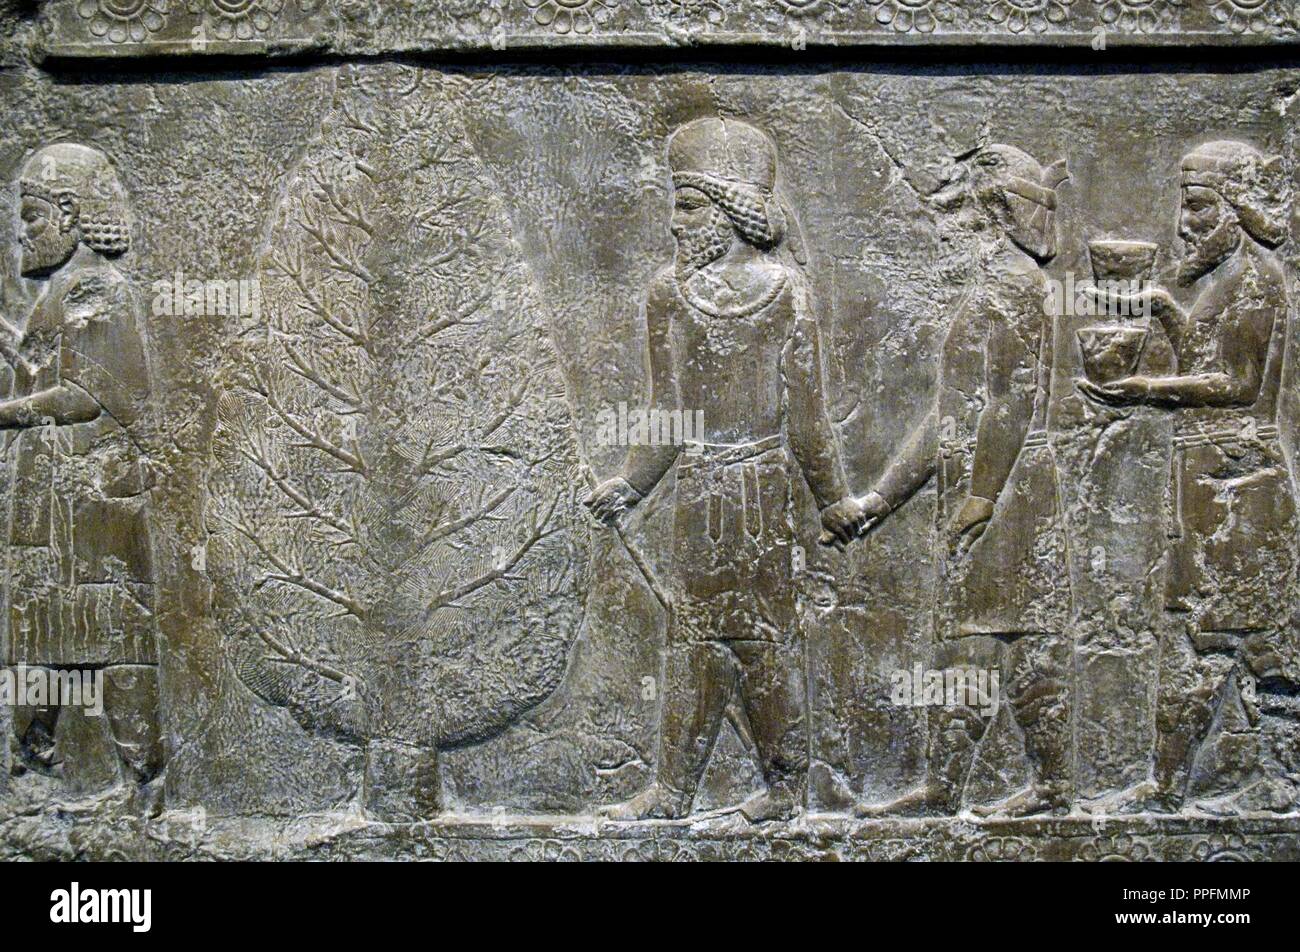 Palace of Darius I (522-486 BC). Reliefs of the outer wall of the staircase of the Apadana or Reception hall depicting phartians and bactrians in procession carrying offerings. Persepolis. Copy by the original preserved in their original place (Iran), 1892. British Museum. London. England. United Kingdom. Stock Photo